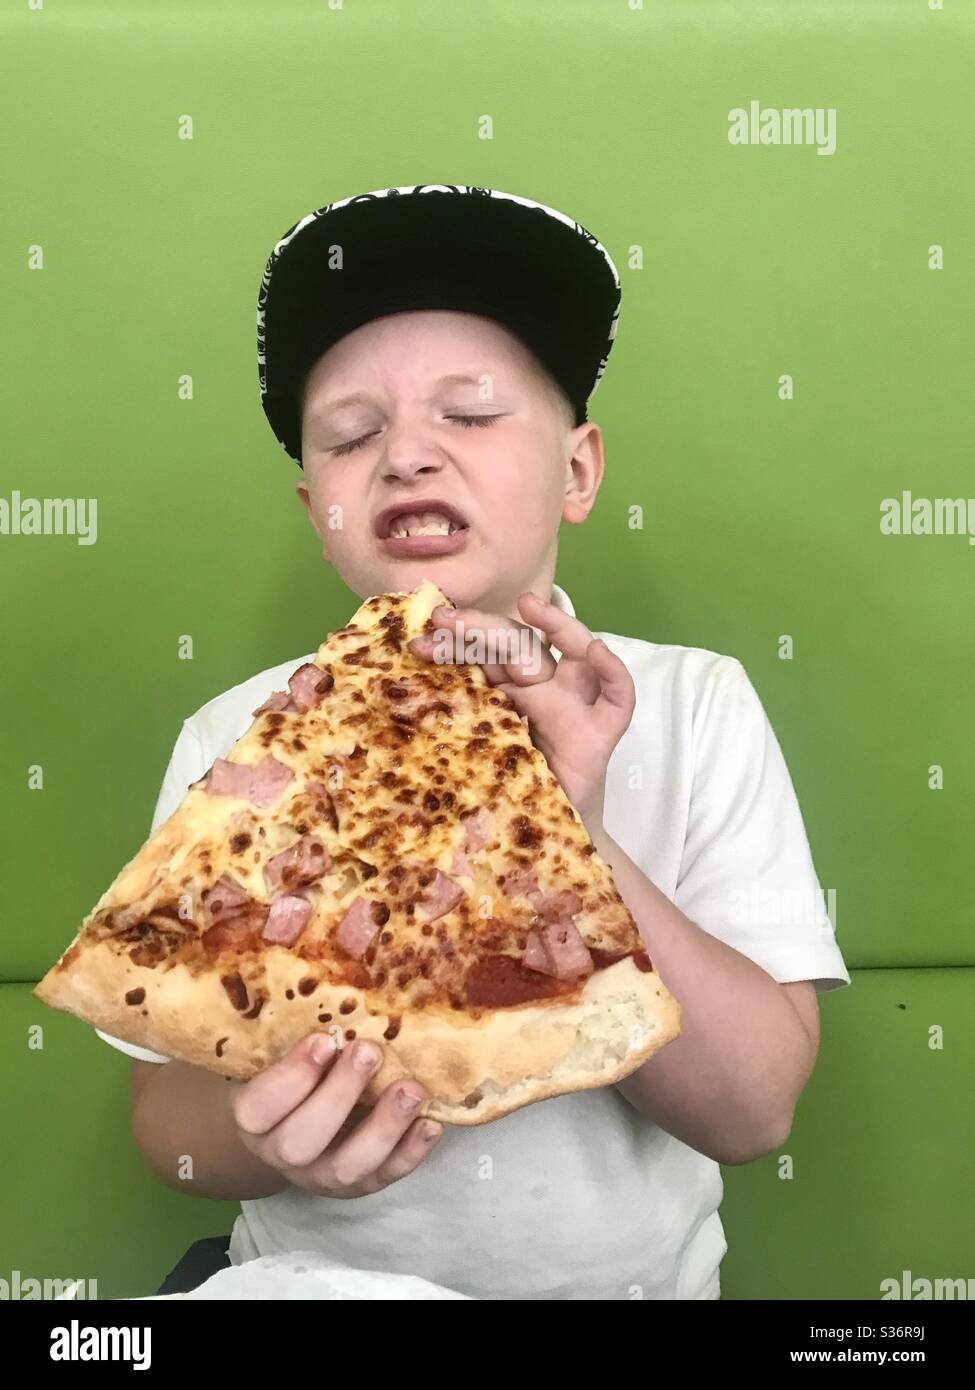 Young boy holds and eats a very large slice of pizza on a green background in school uniform Stock Photo